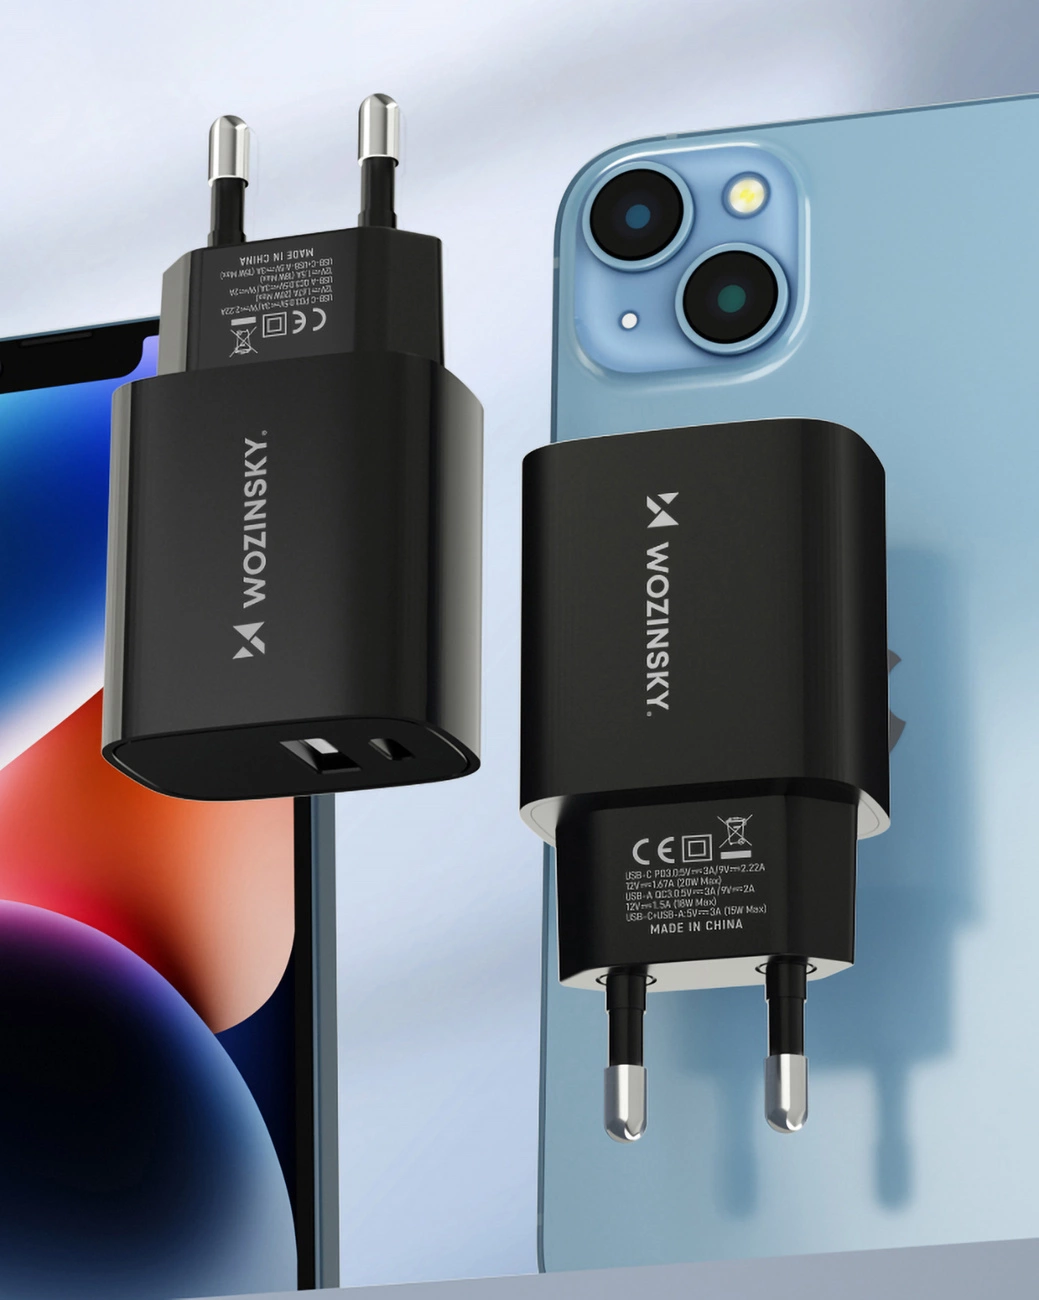 Two Wozinsky WGWCB chargers with USB-A and USB-C connectors with a power of up to 20W against the background of an iPhone and iPad